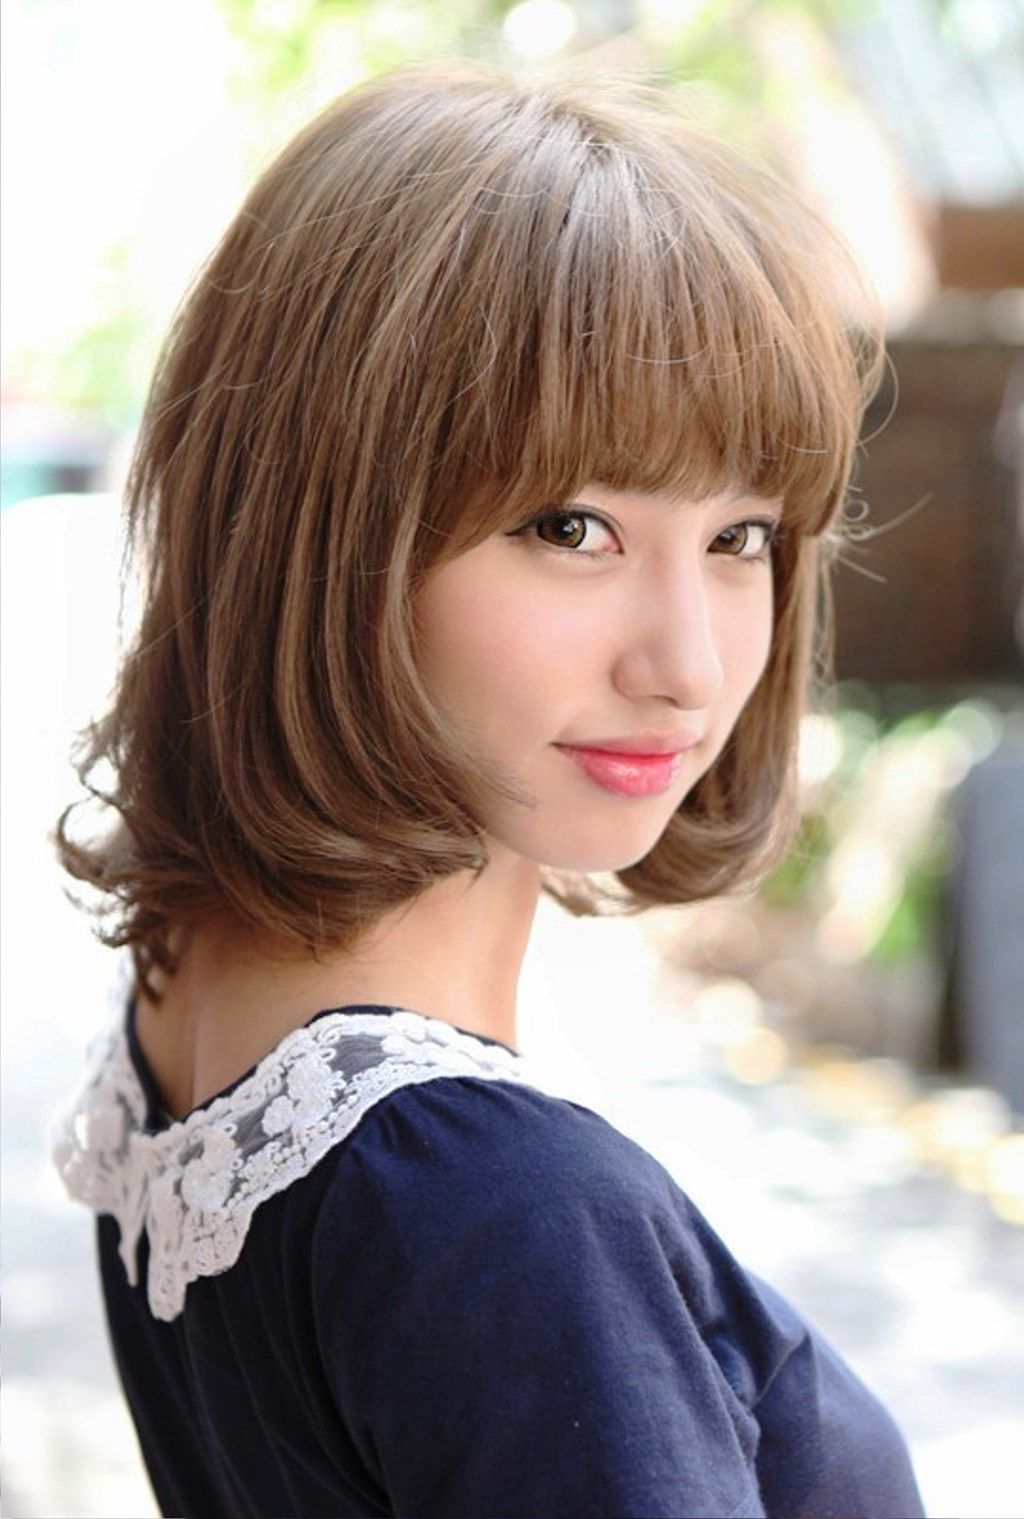 Haircuts With Bangs In Well Liked Blunt Bangs Asian Hairstyles (View 8 of 10)